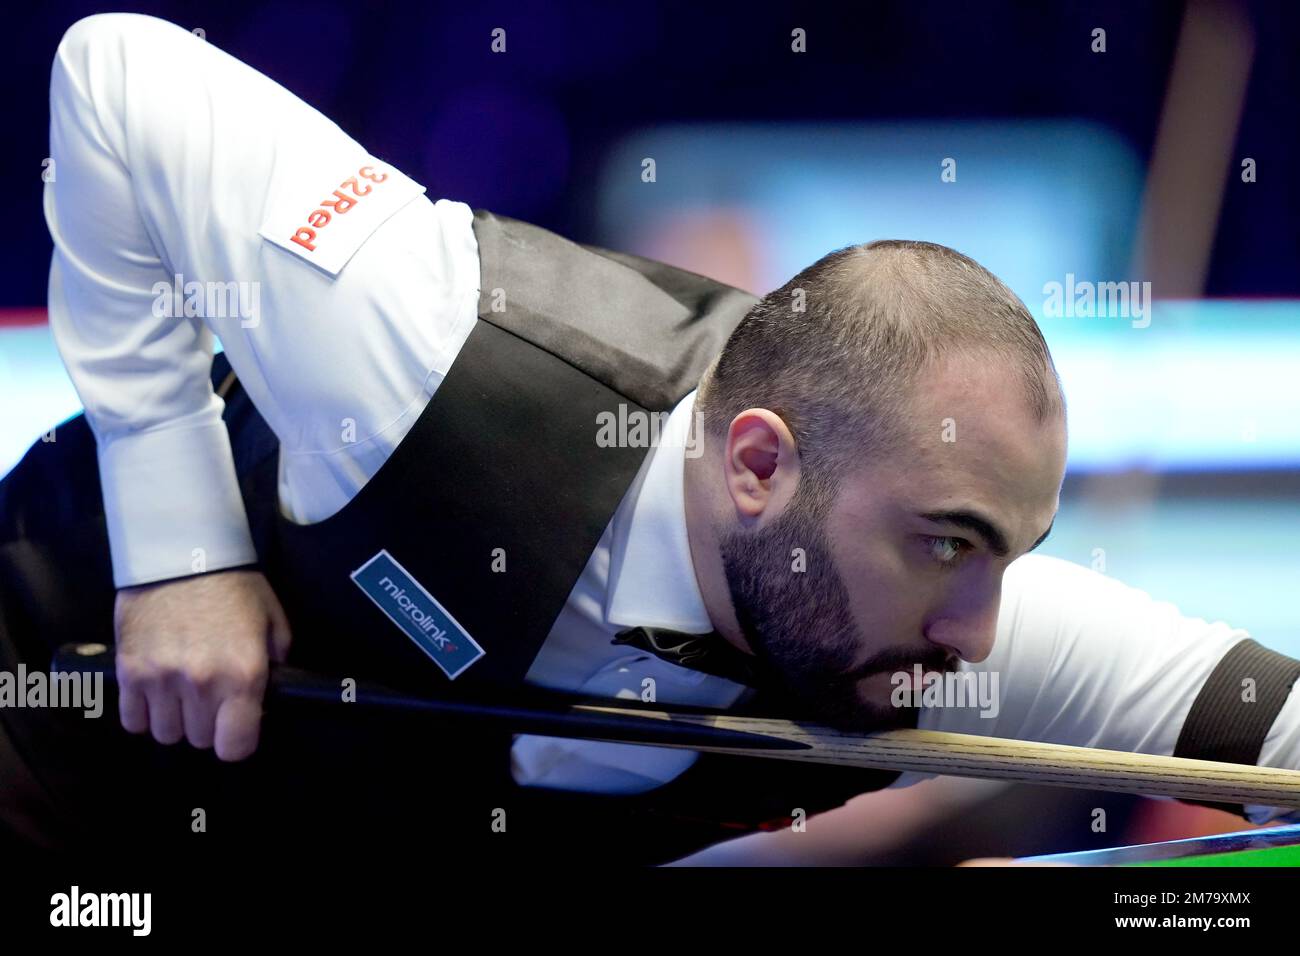 Hossein Vafaei during his match against Mark Selby during day one of the Cazoo Masters at Alexandra Palace, London